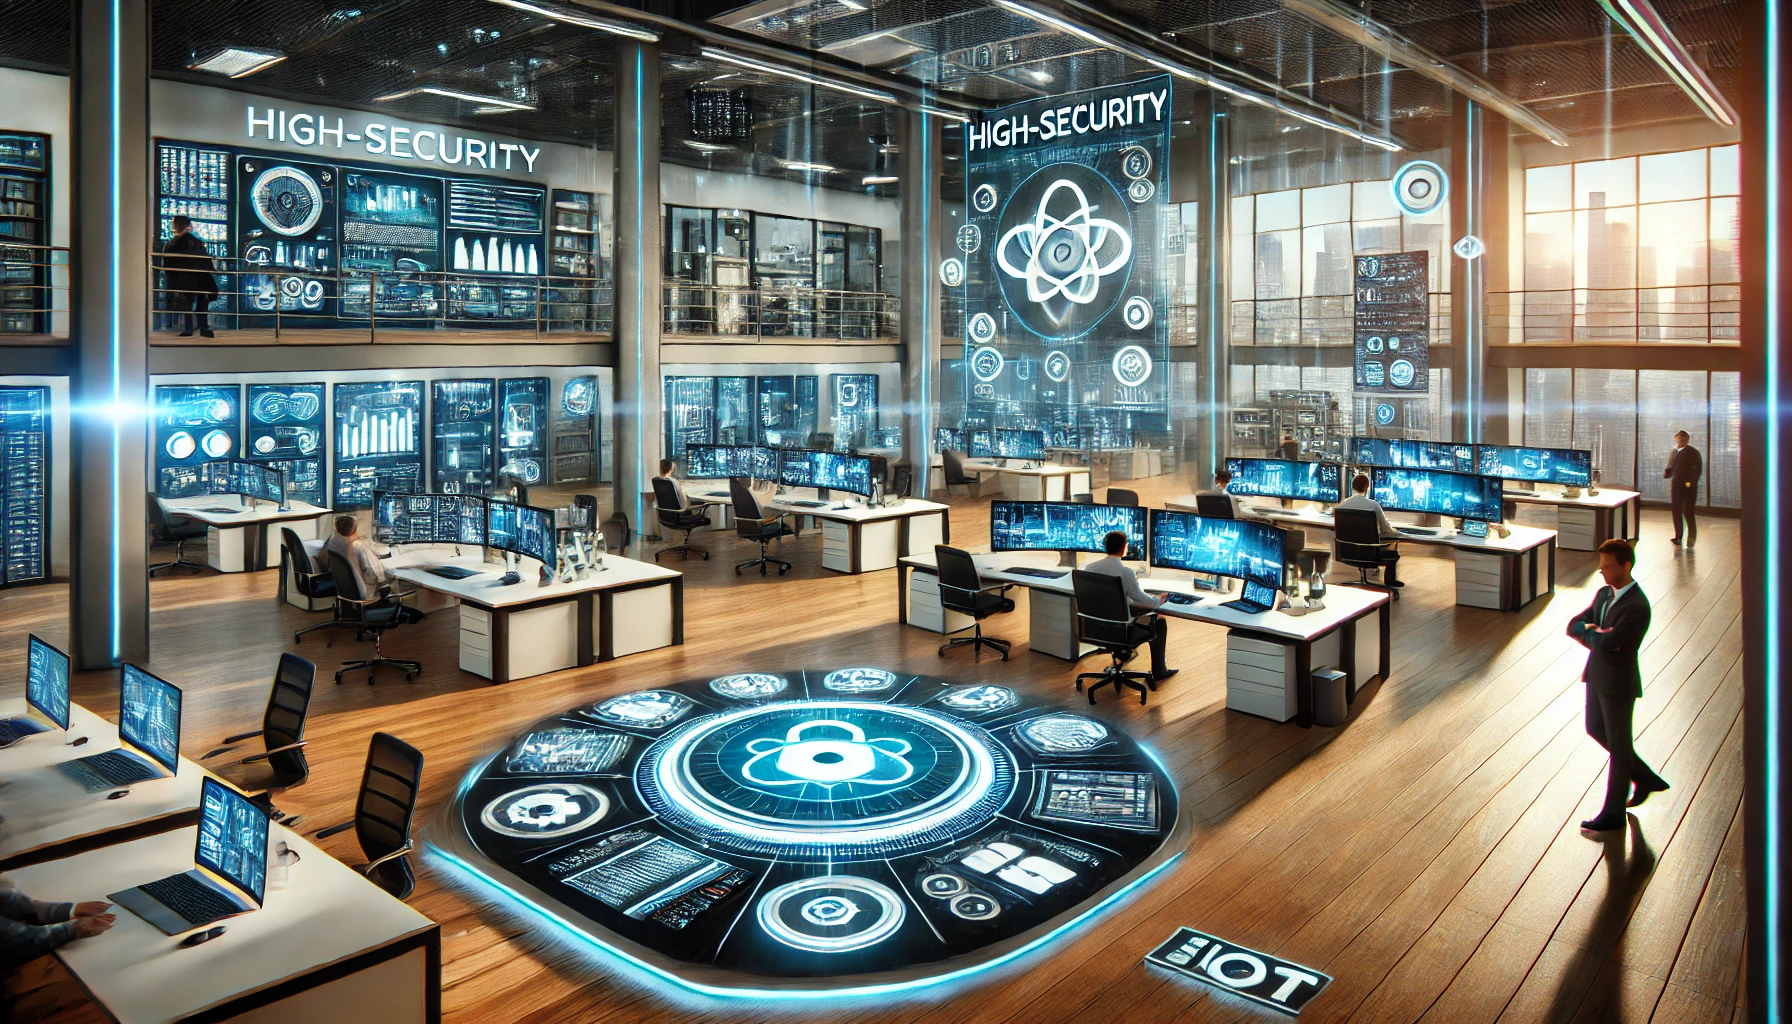 Futuristic office featuring advanced IoT devices, high-tech sensors, smart screens, and robust cybersecurity measures